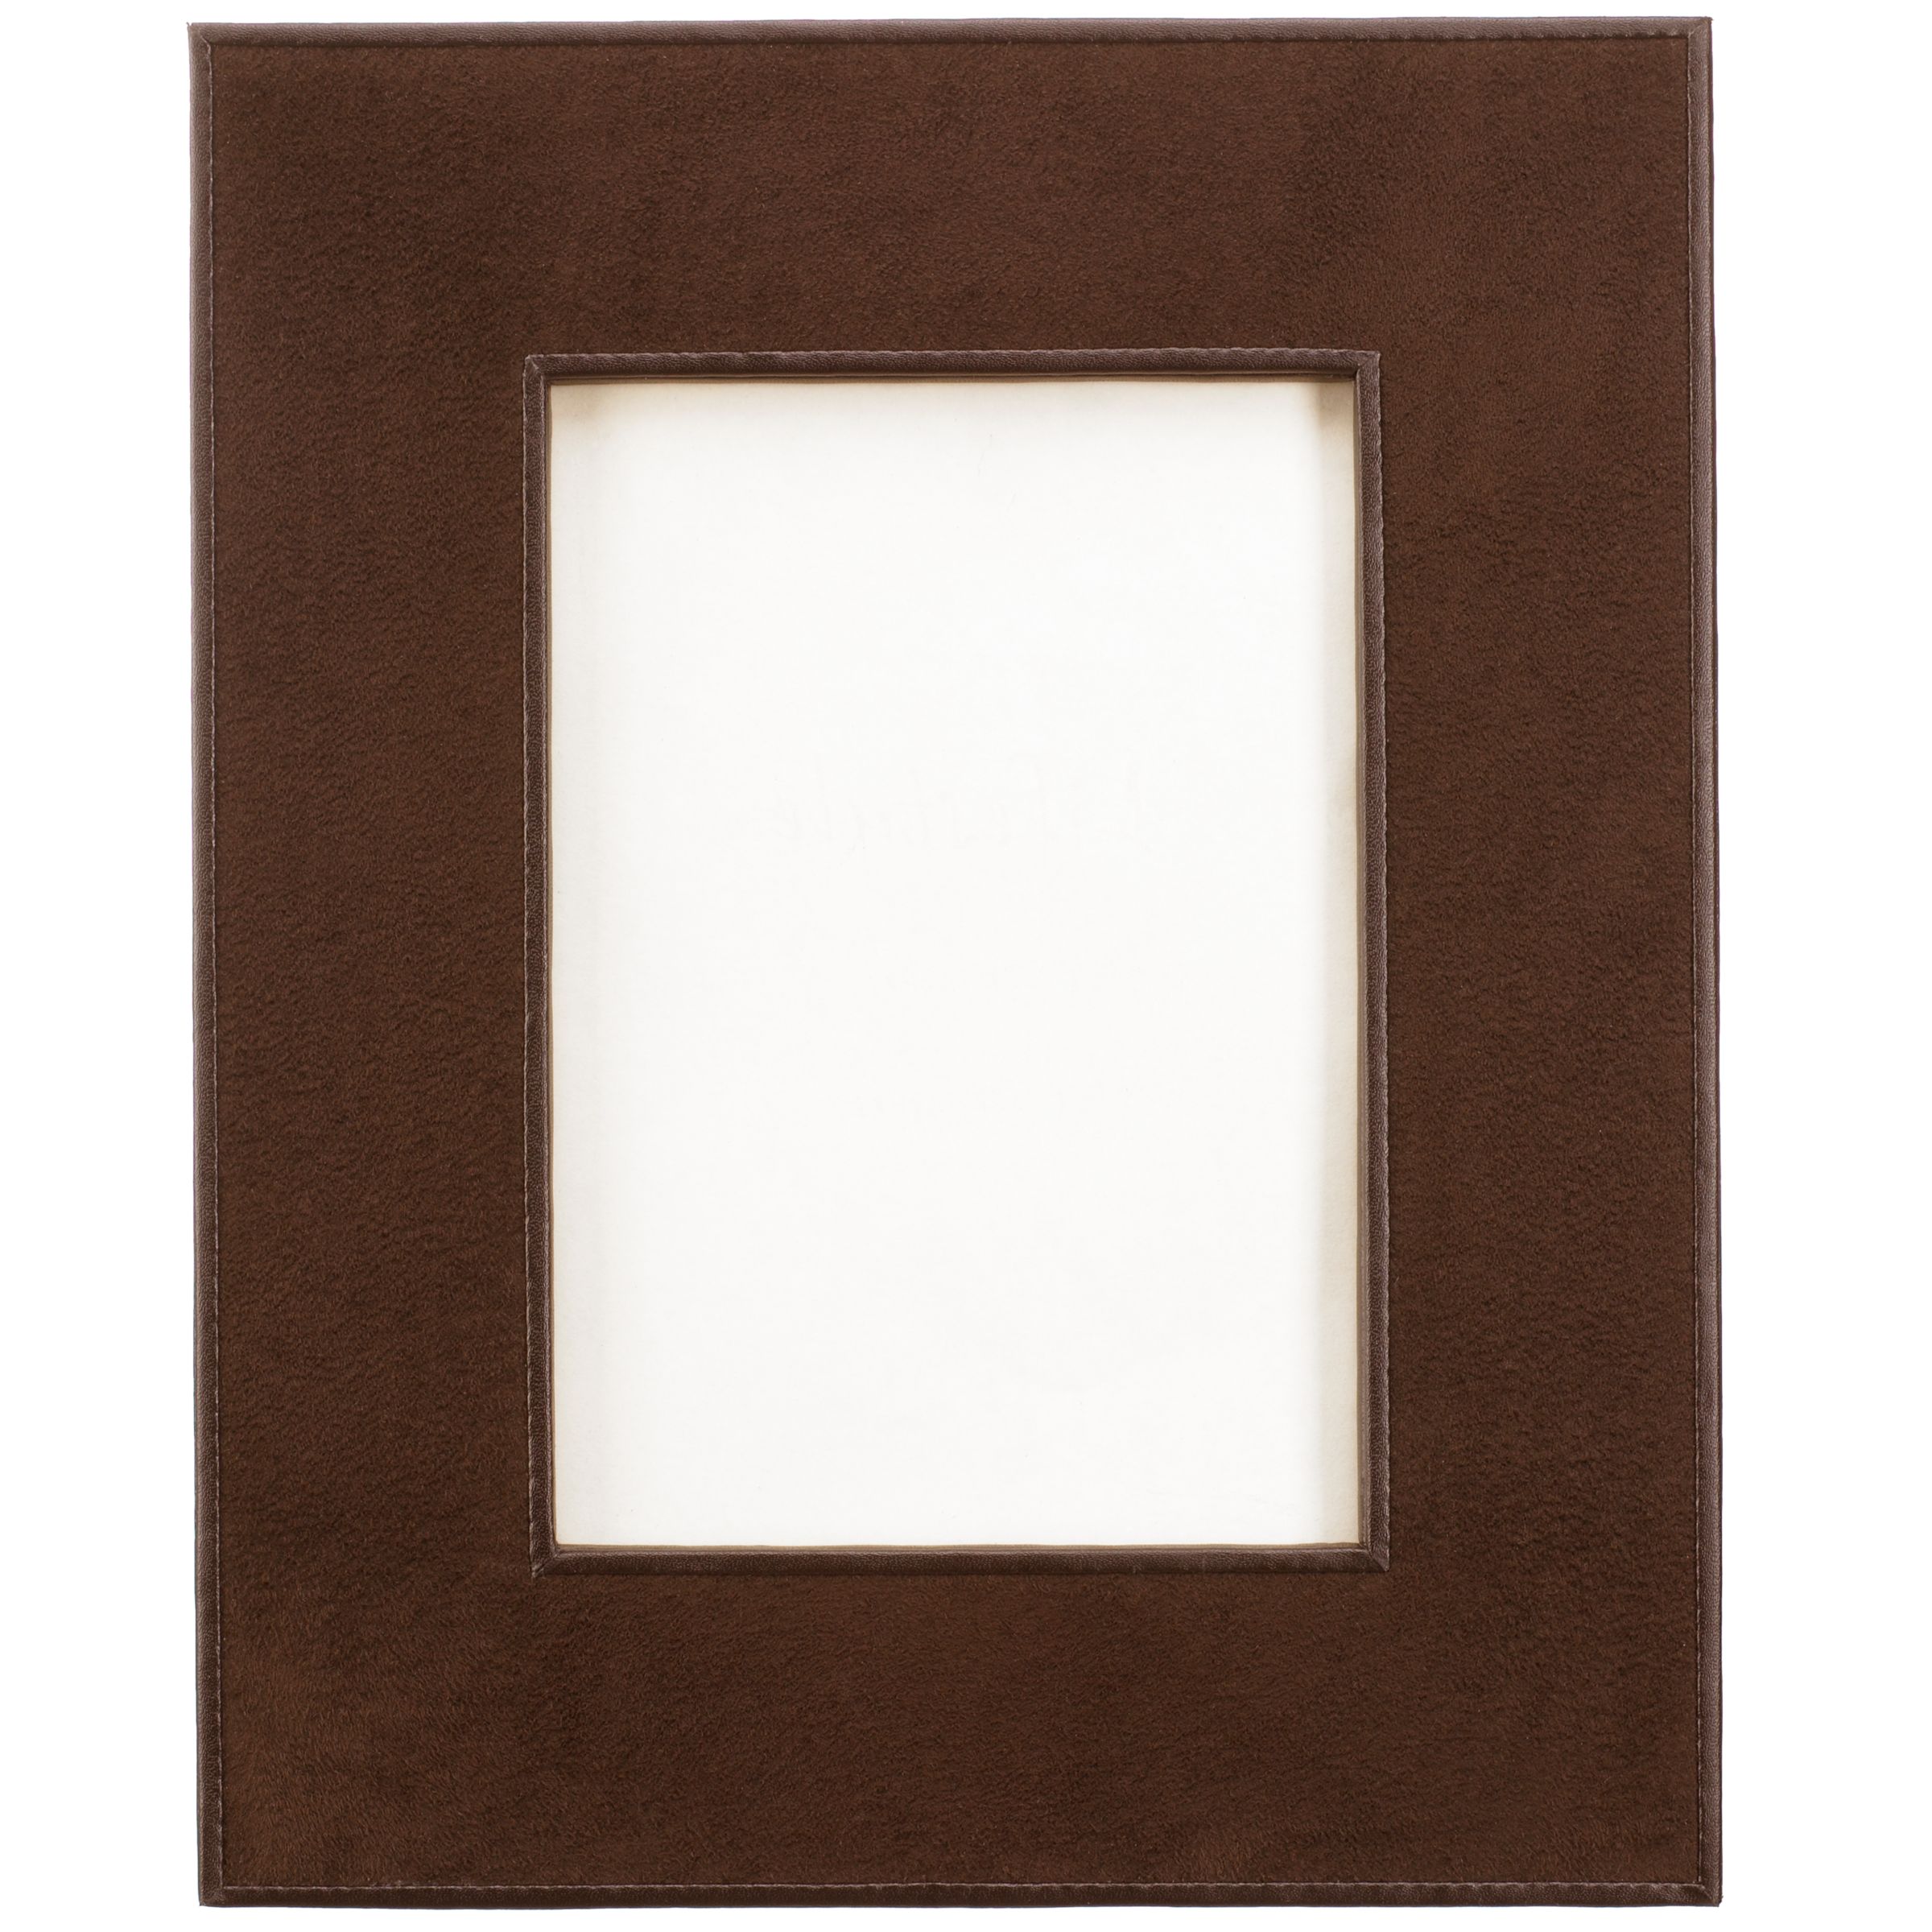 Faux Suede Photo Frame, Chocolate